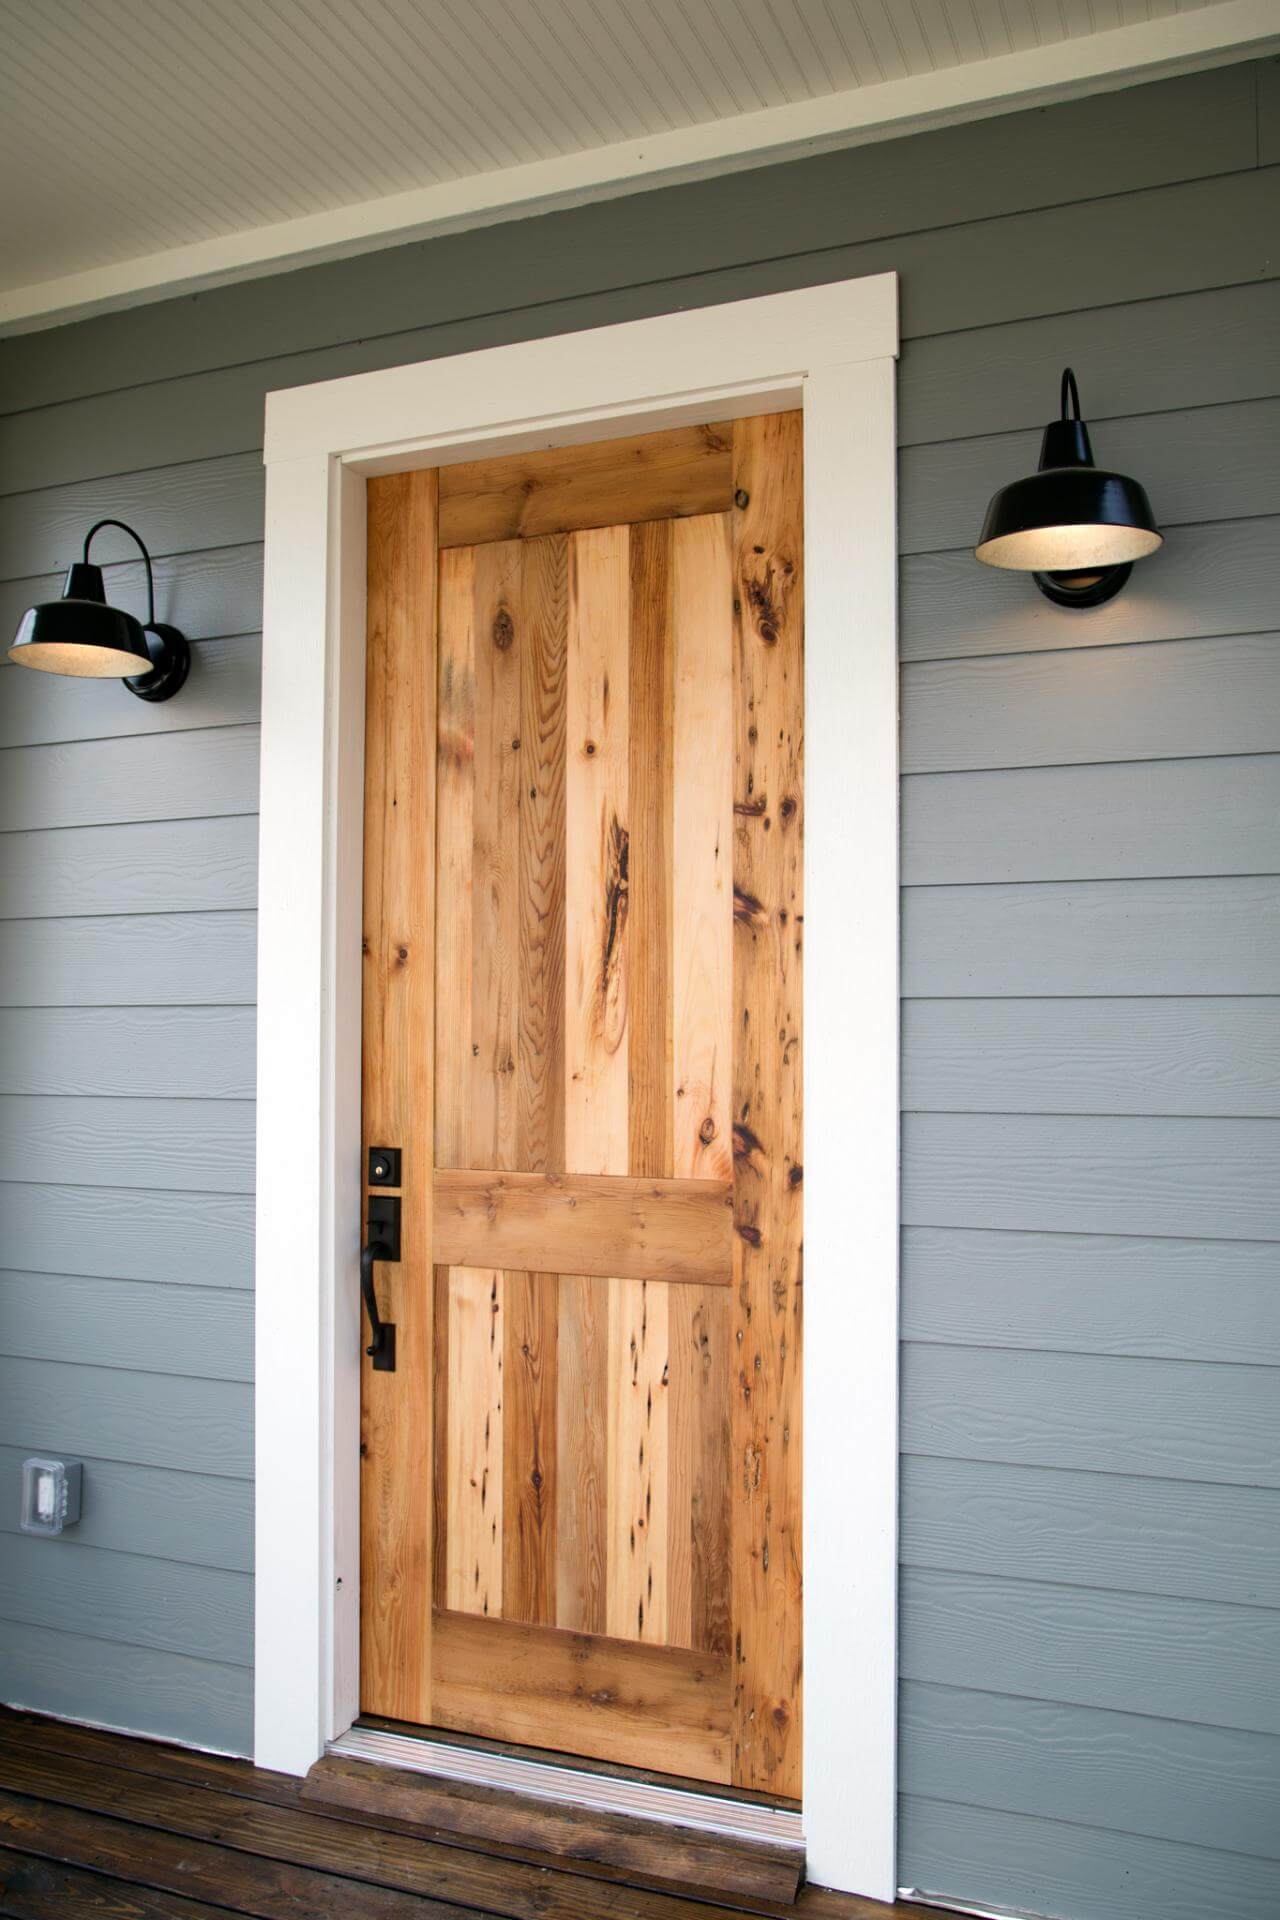 Barn Door Delights: Incorporating Farmhouse Features In Modern Homes